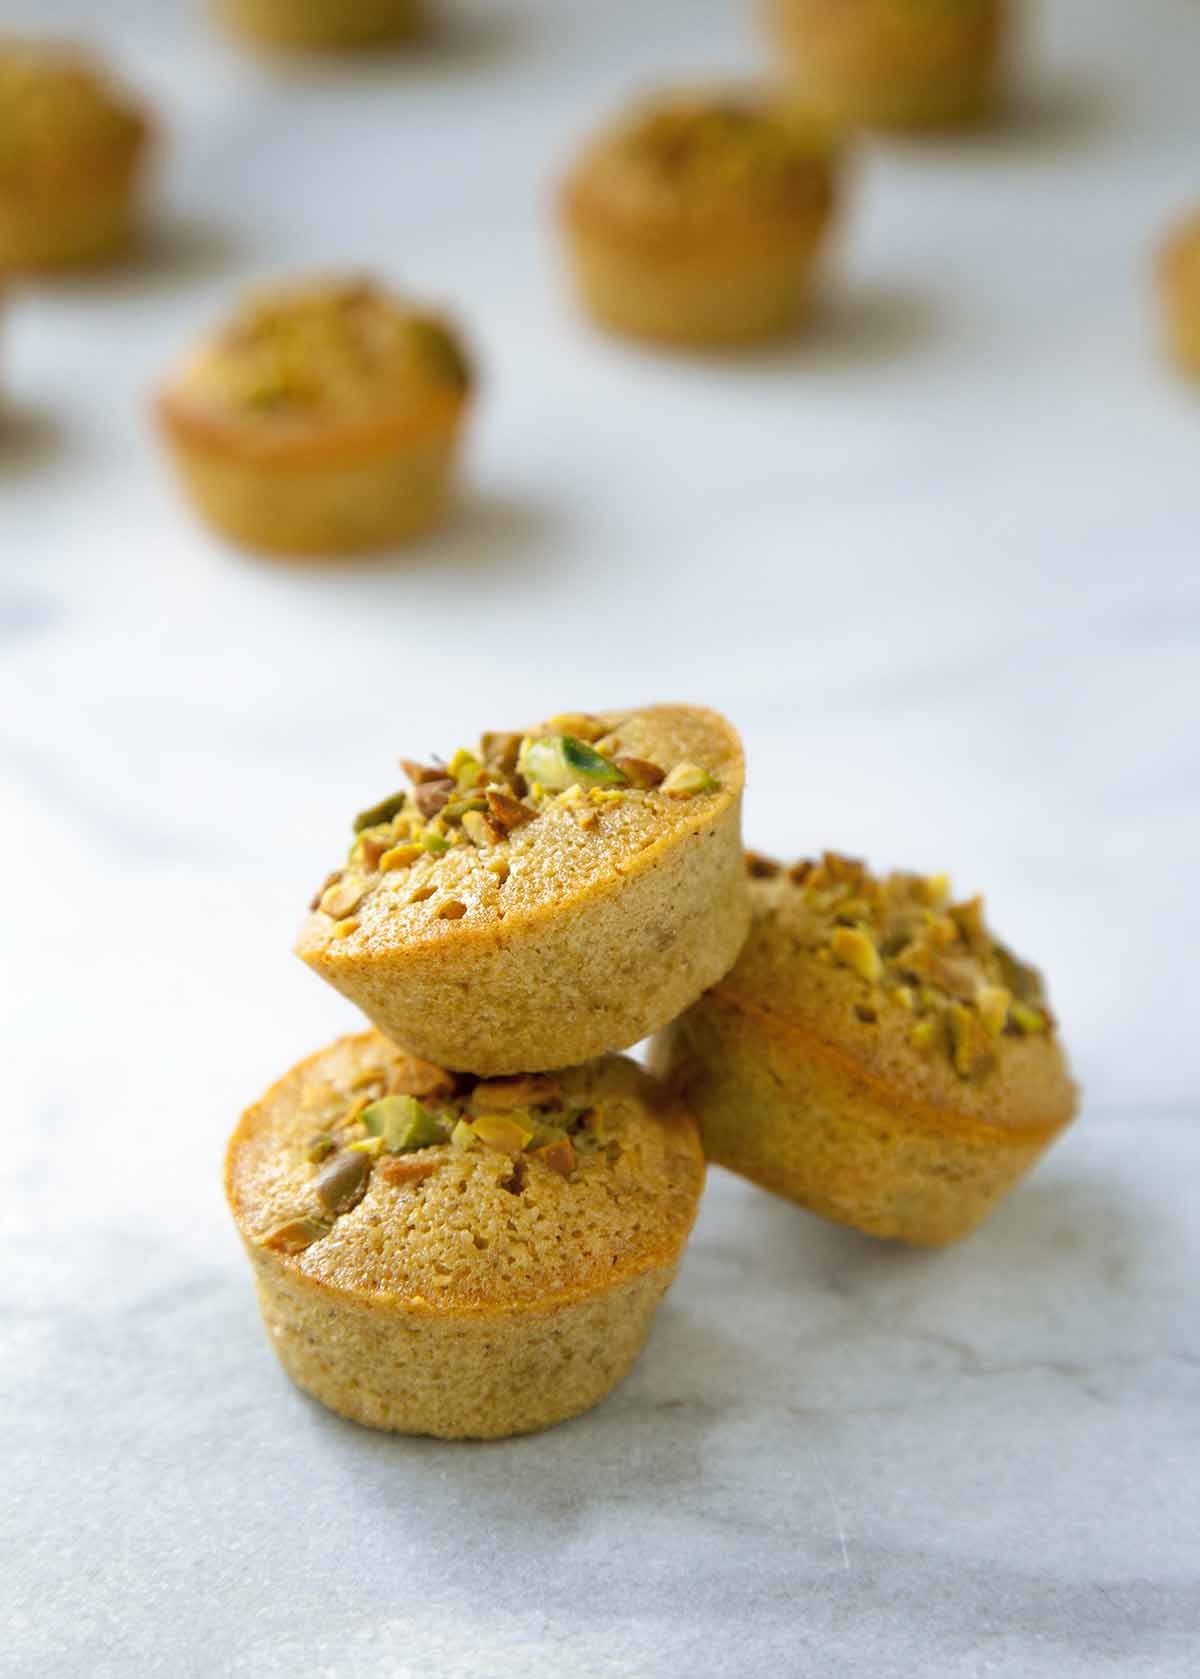 Three Pistachio Financiers stacked on top of each other.